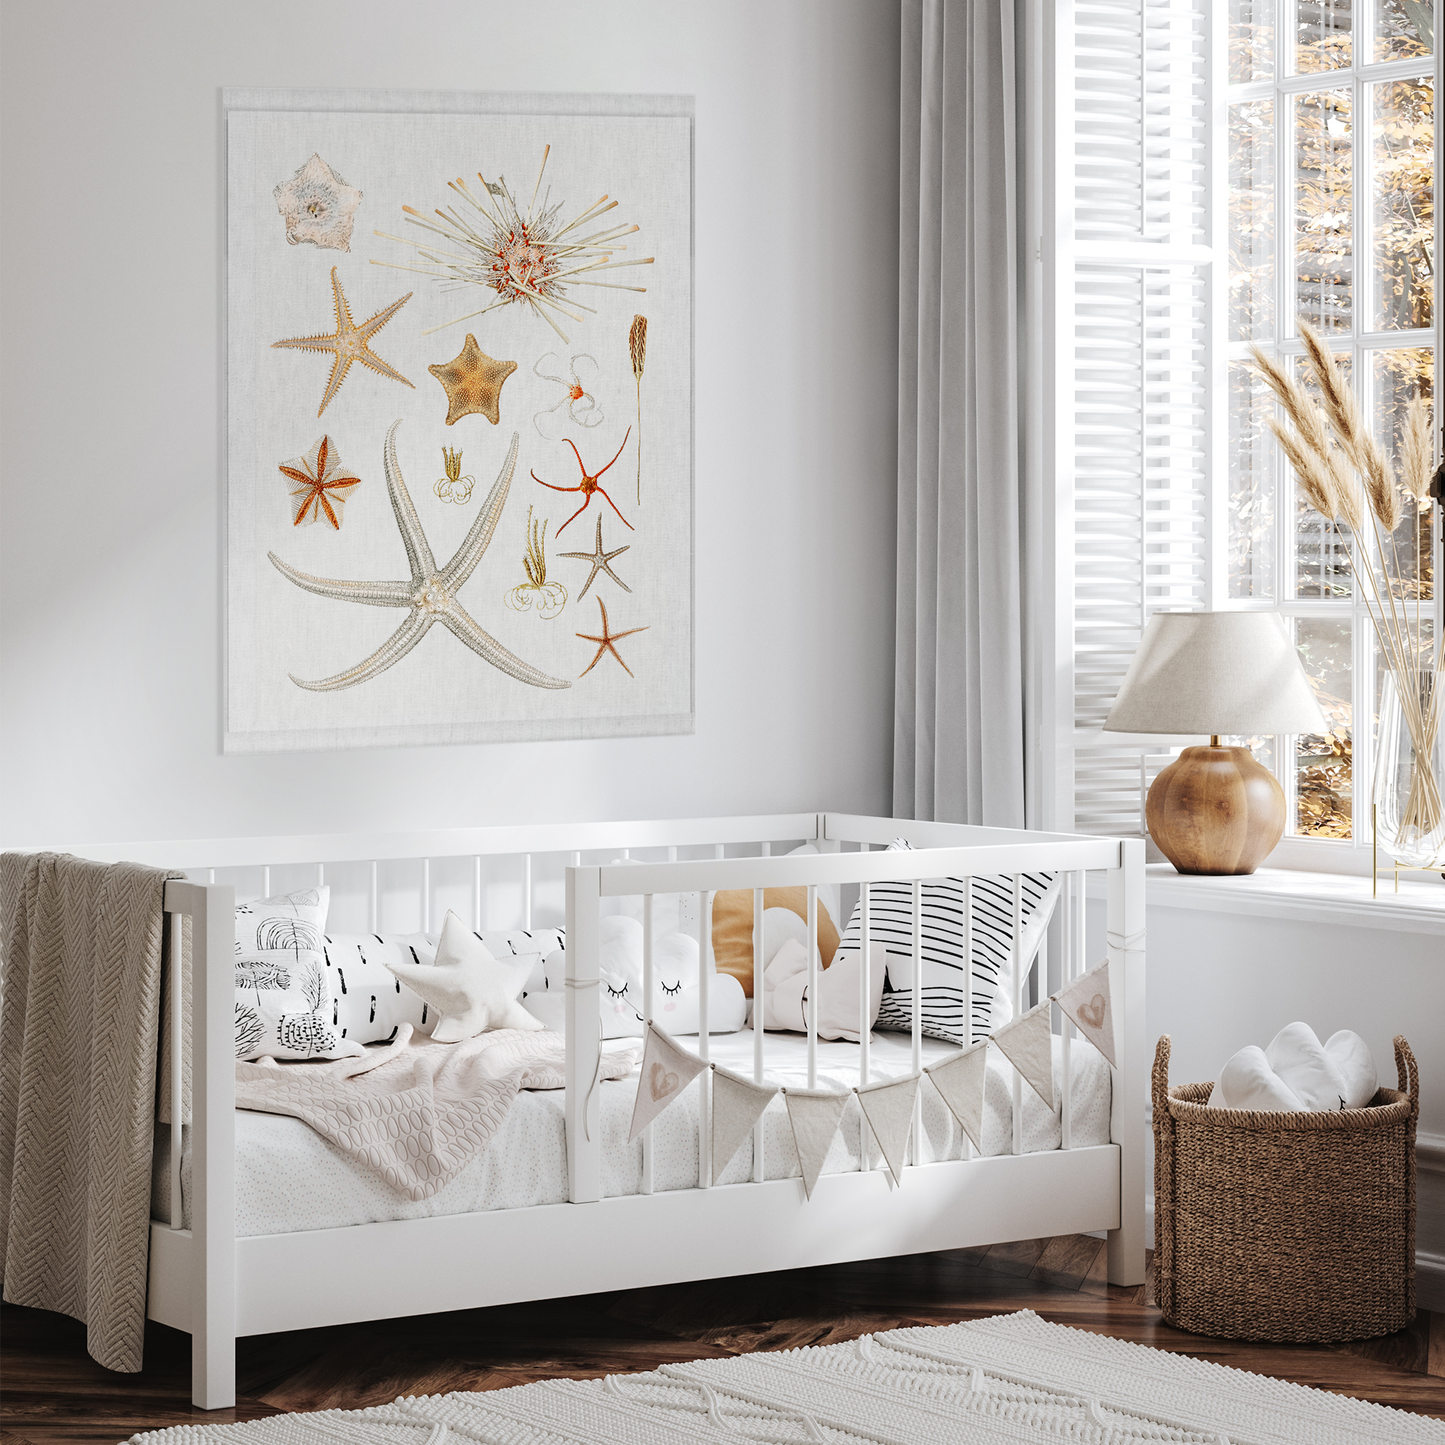 Stars In The Sky | Wall Hanging